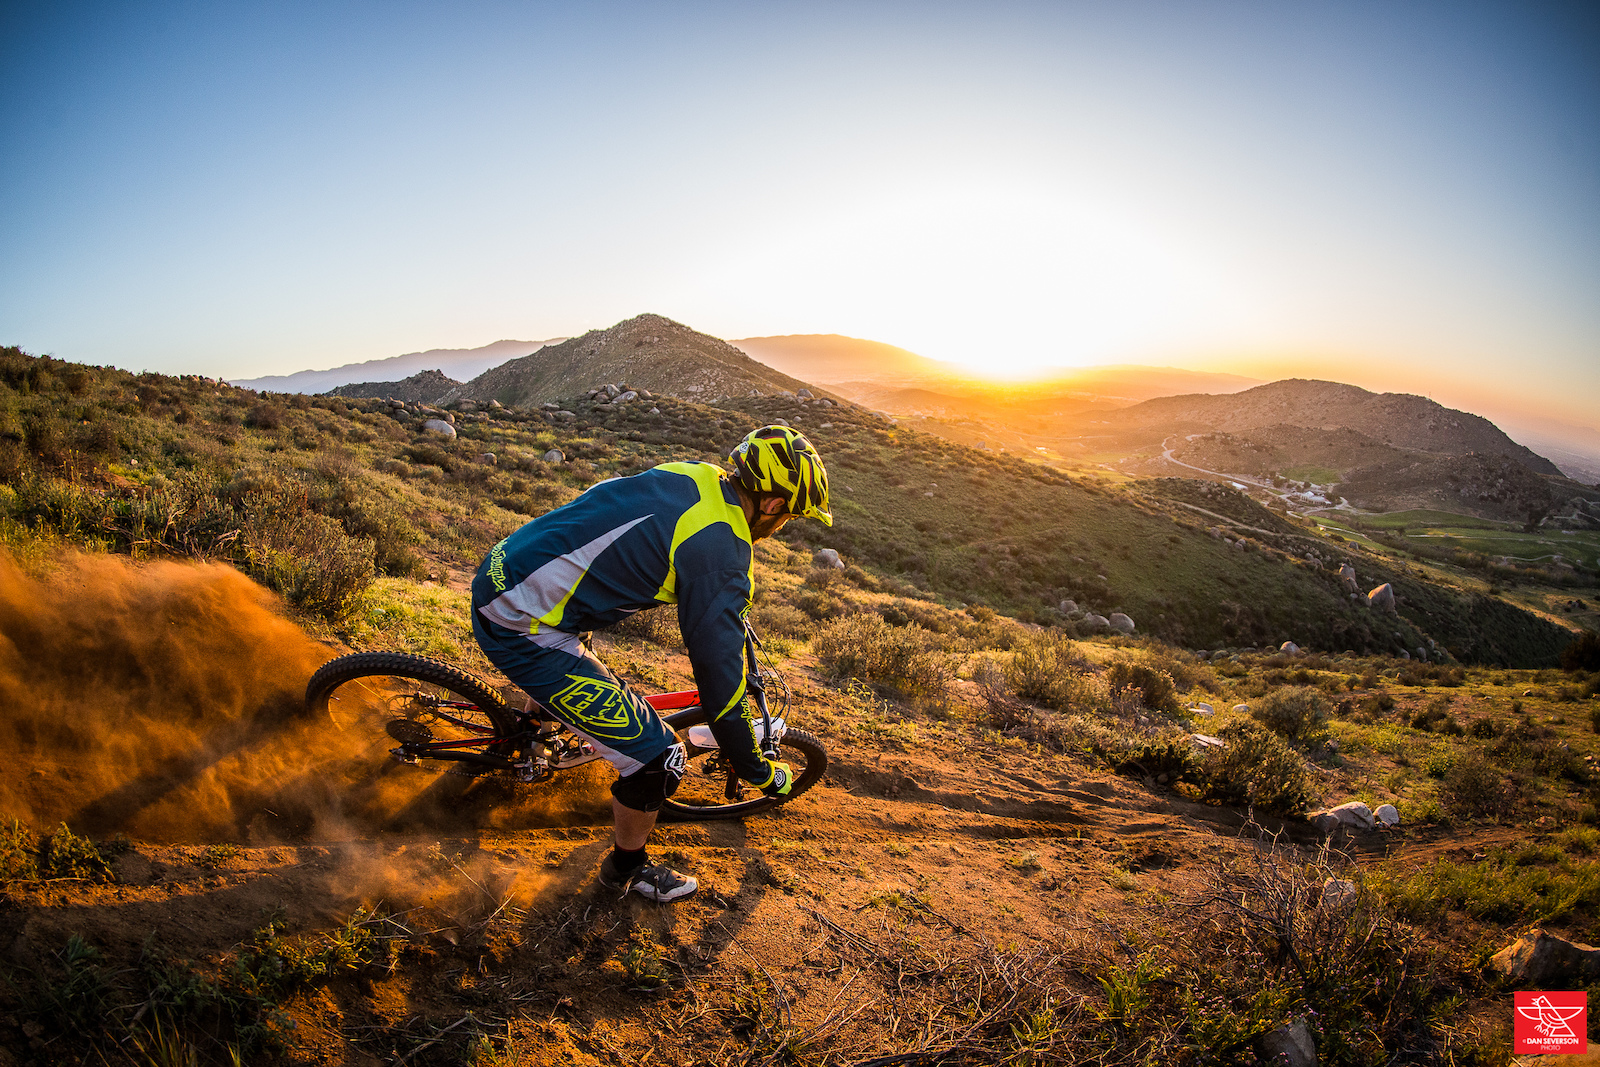 Testing out a loose turn up in the hills.

www.danseversonphoto.com